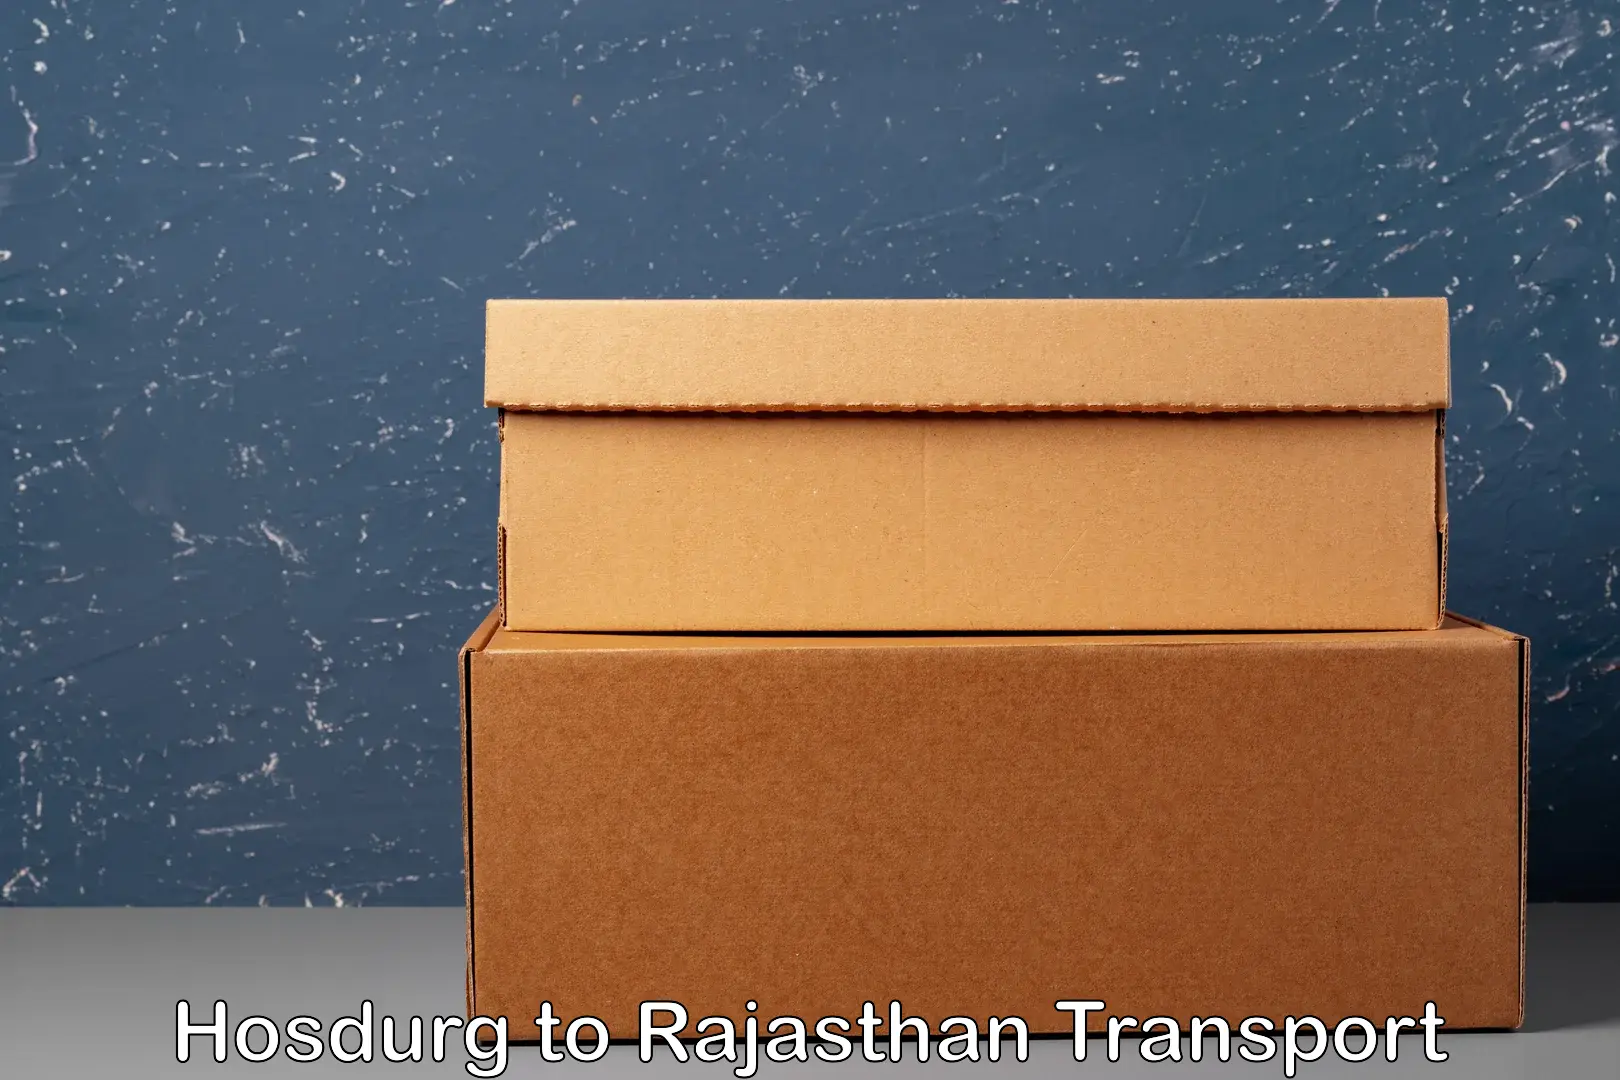 Container transport service Hosdurg to Rajasthan